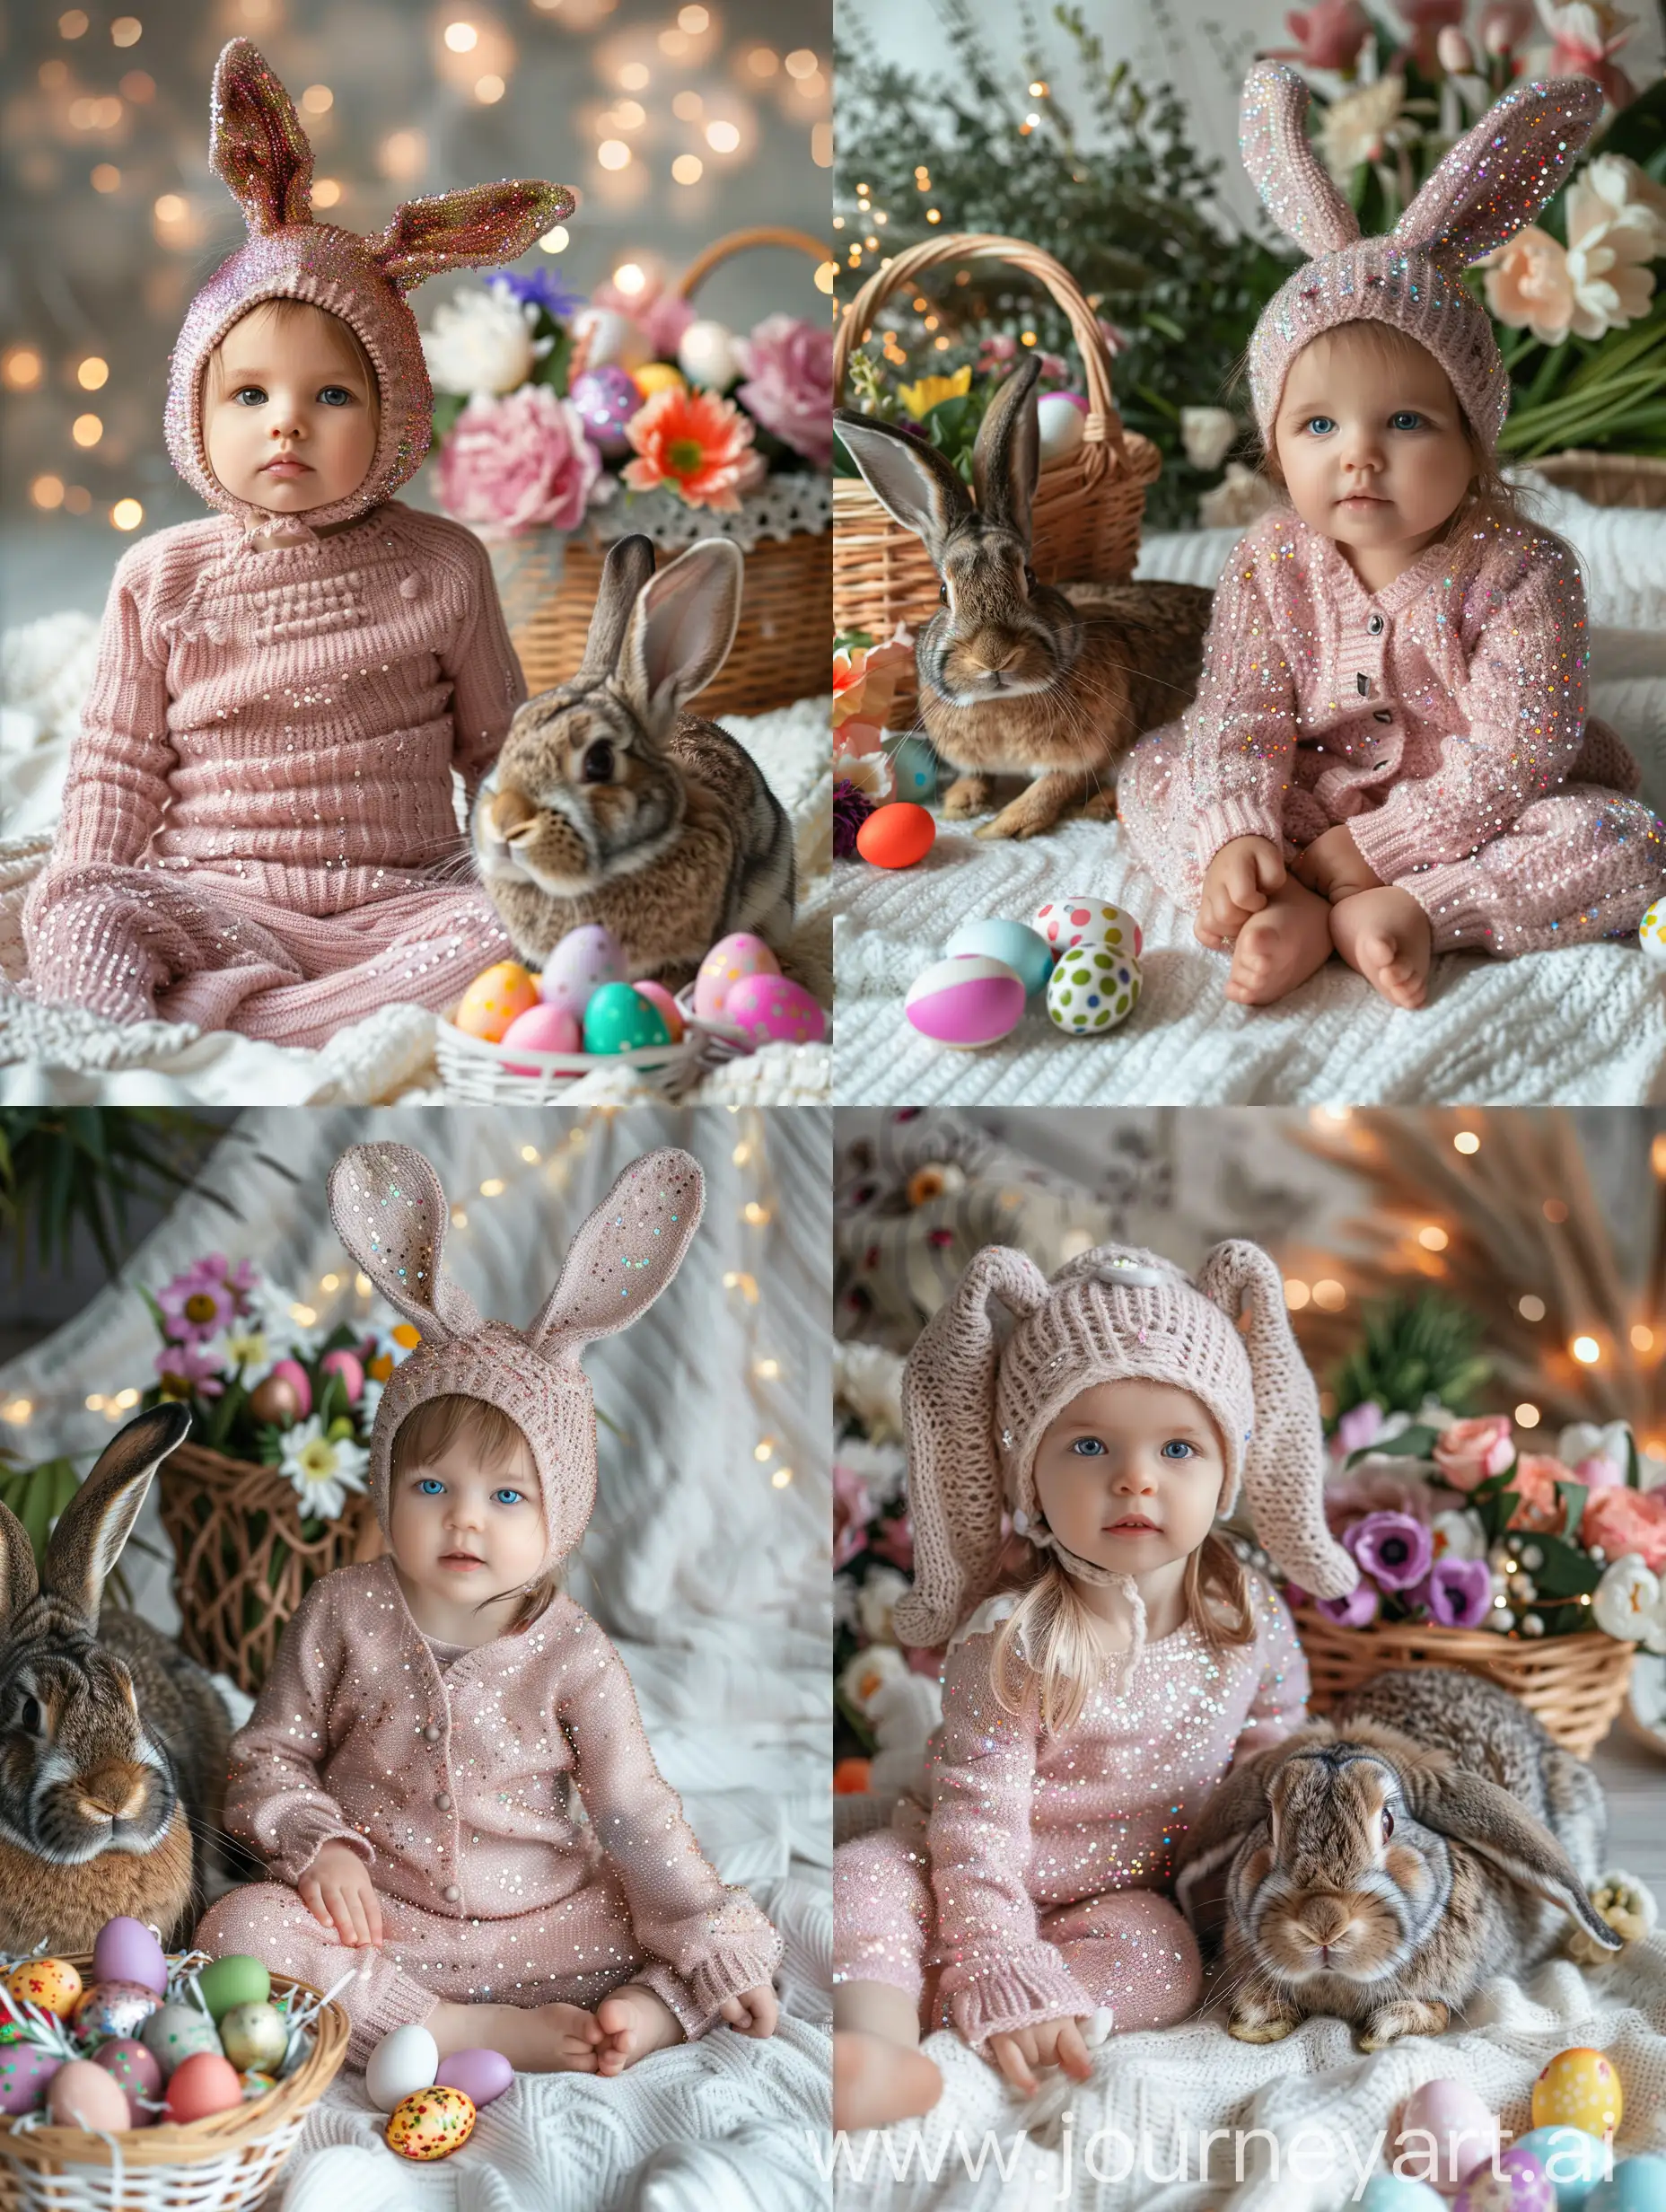 Adorable-Easter-Bunny-Child-with-Live-Rabbit-and-Colorful-Eggs